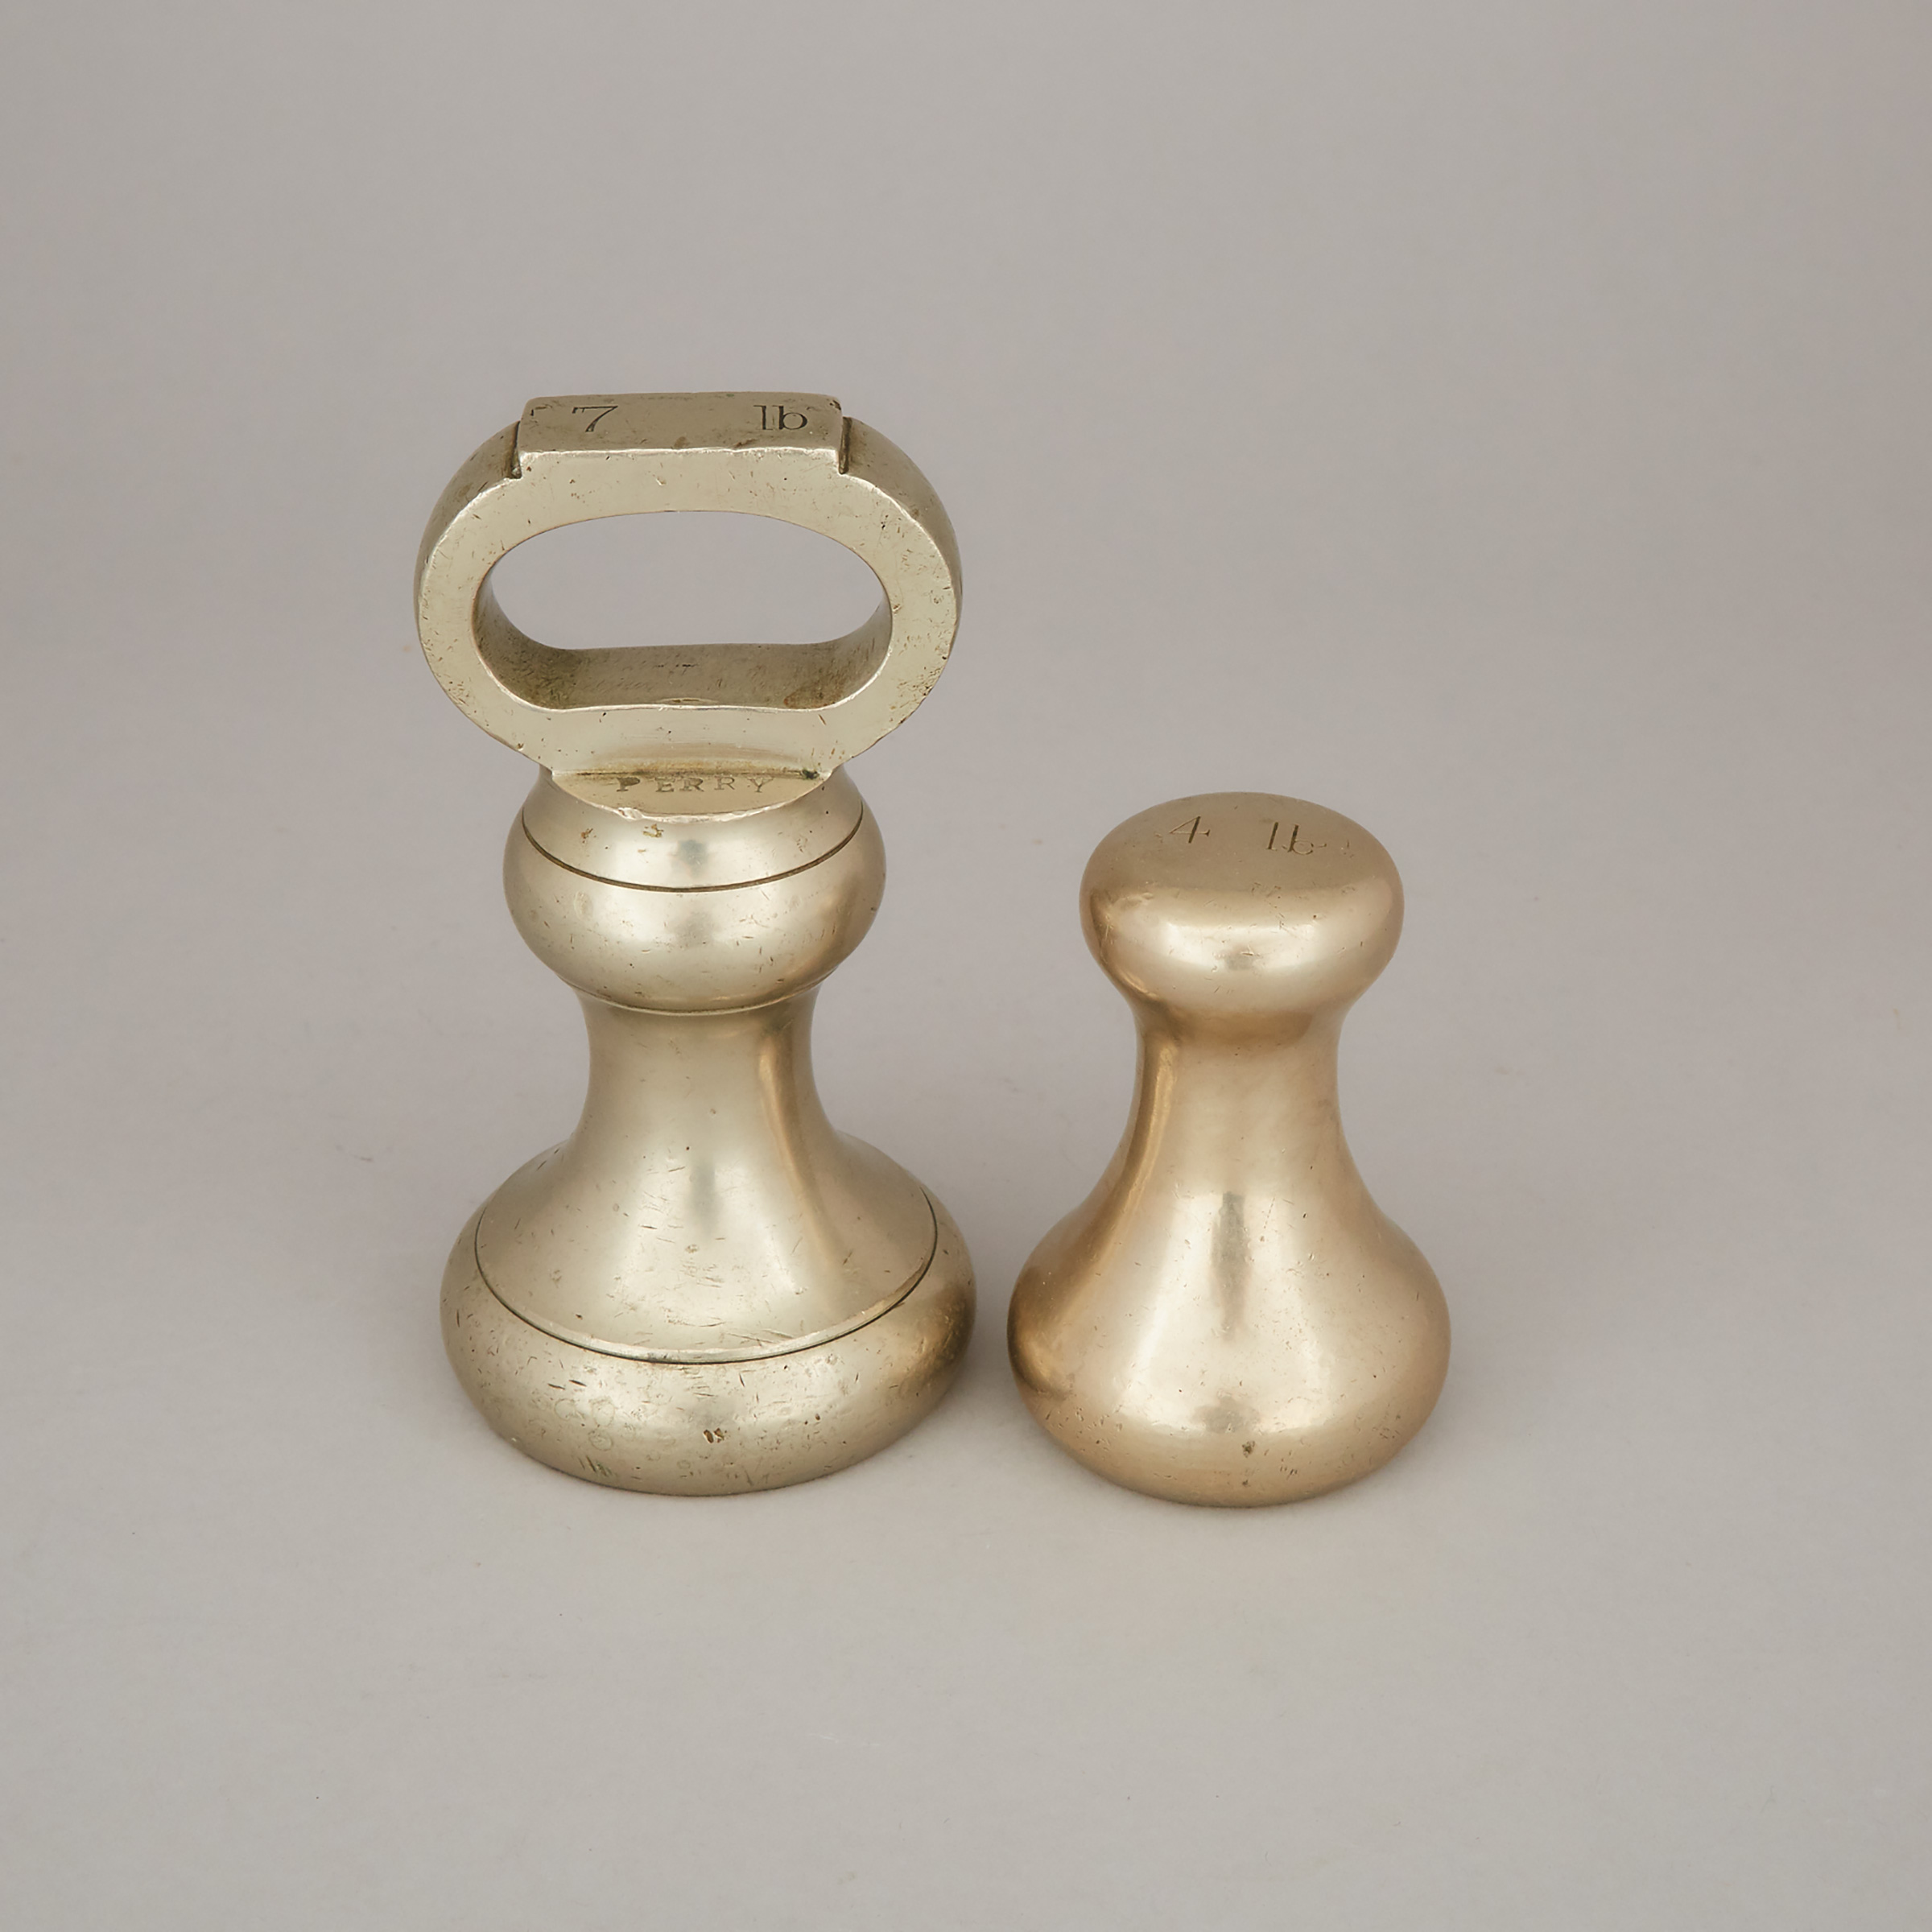 Two English Bronze Butcher's Weights, Perry & Co., London, 19th century